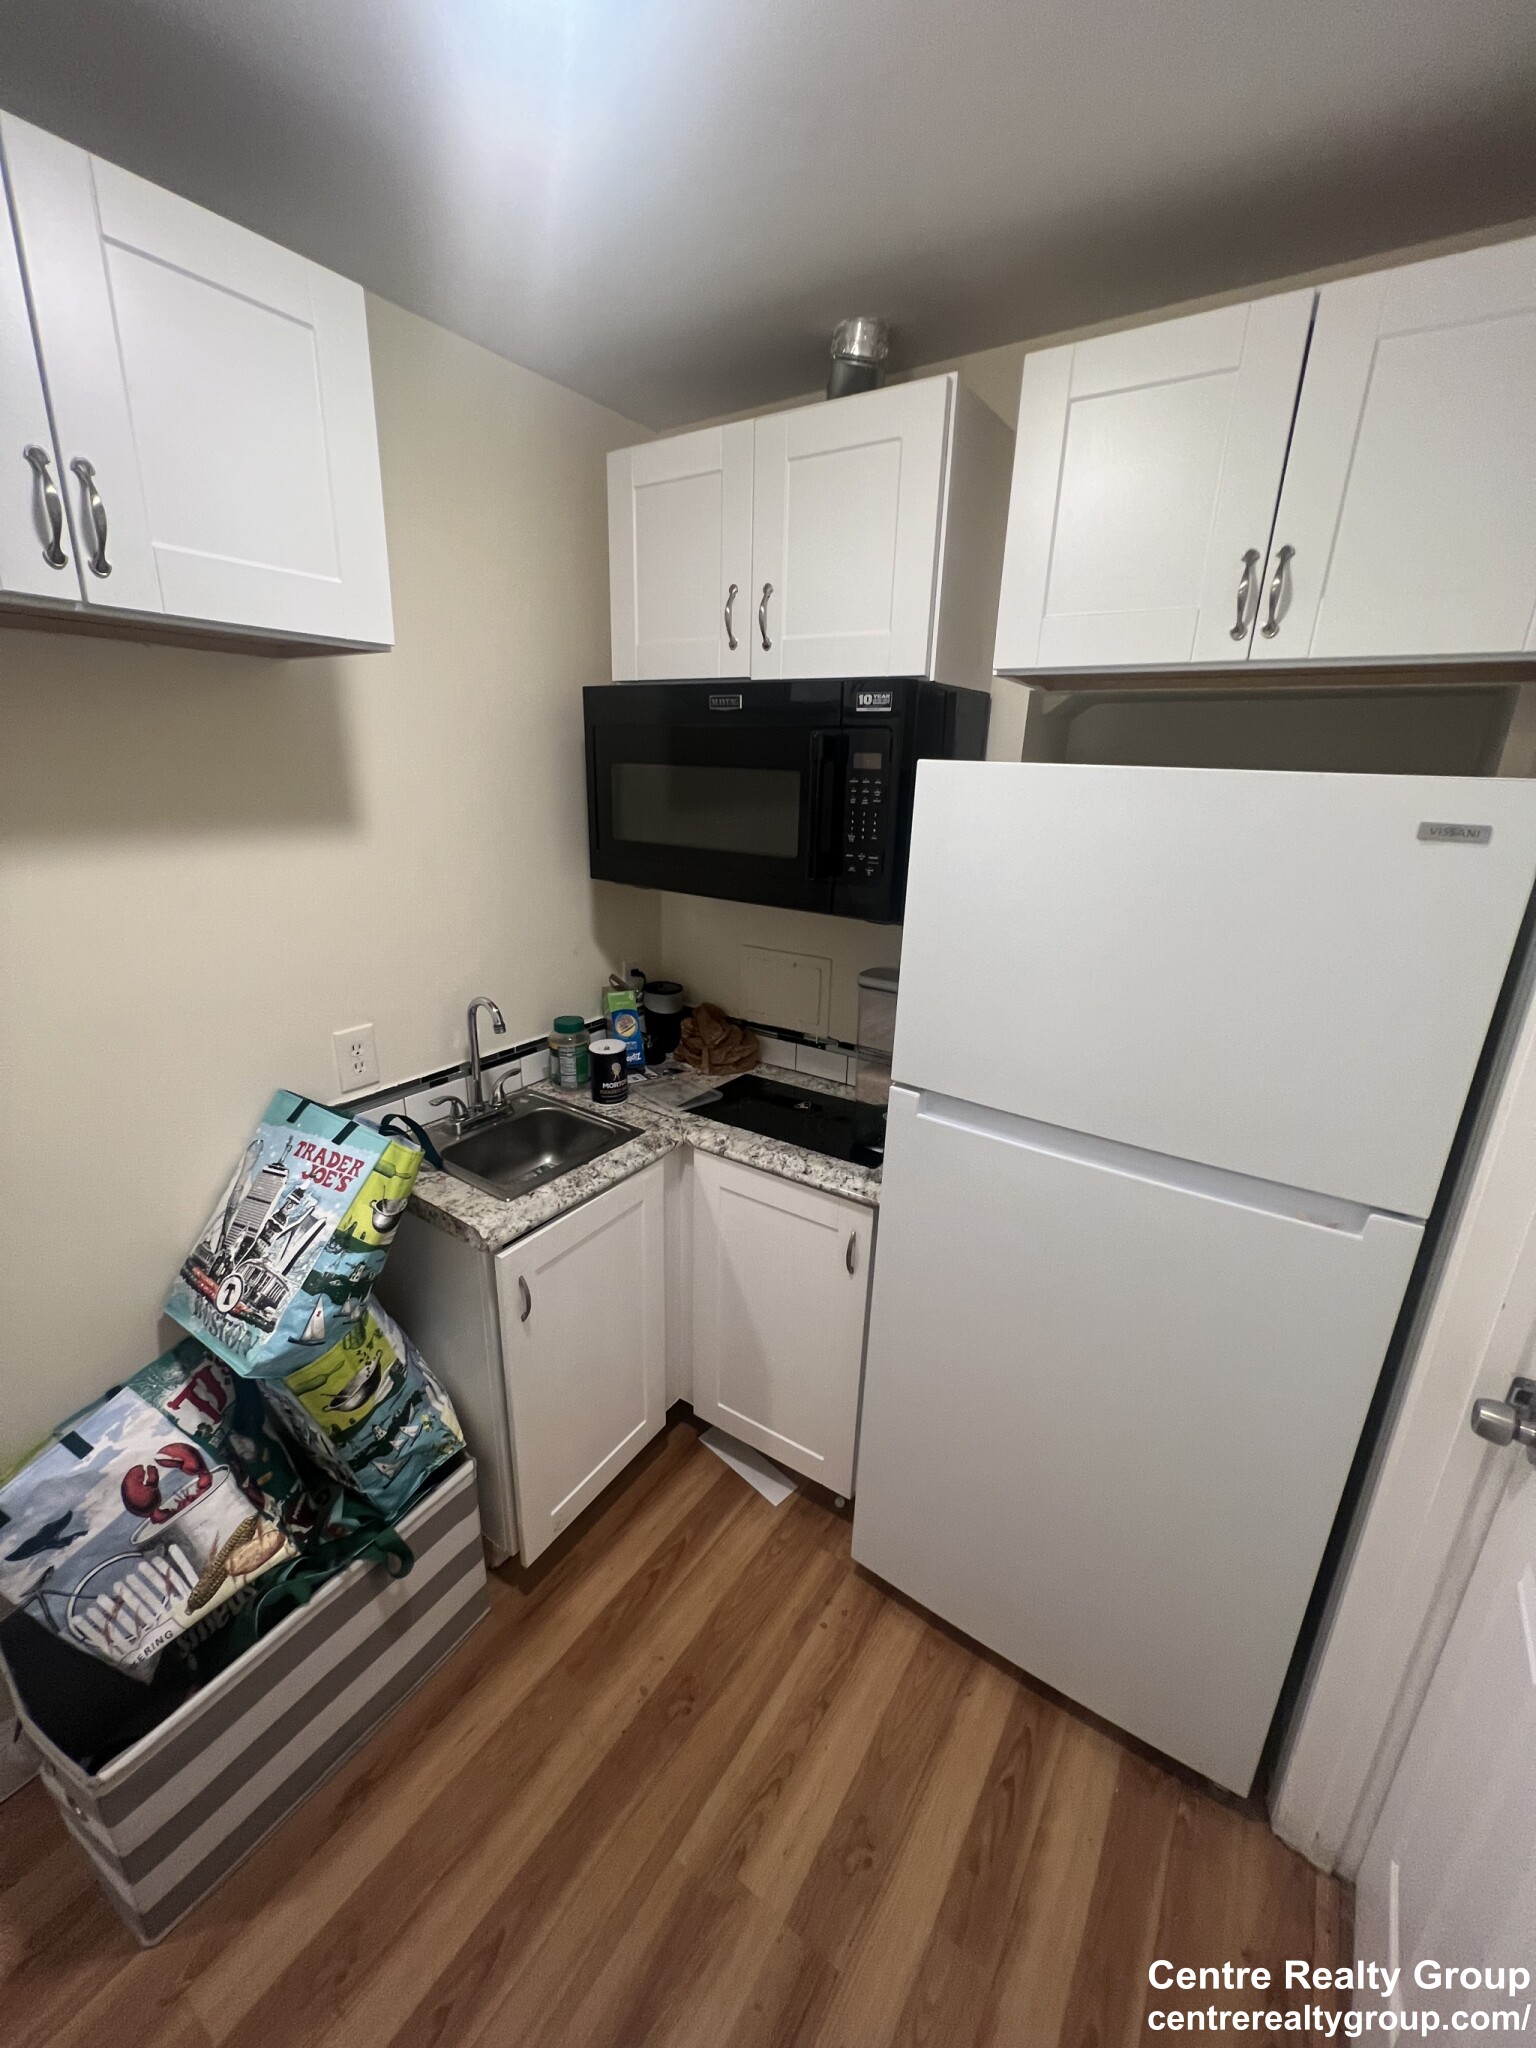 Photos of apartment on South St.,Waltham MA 02453